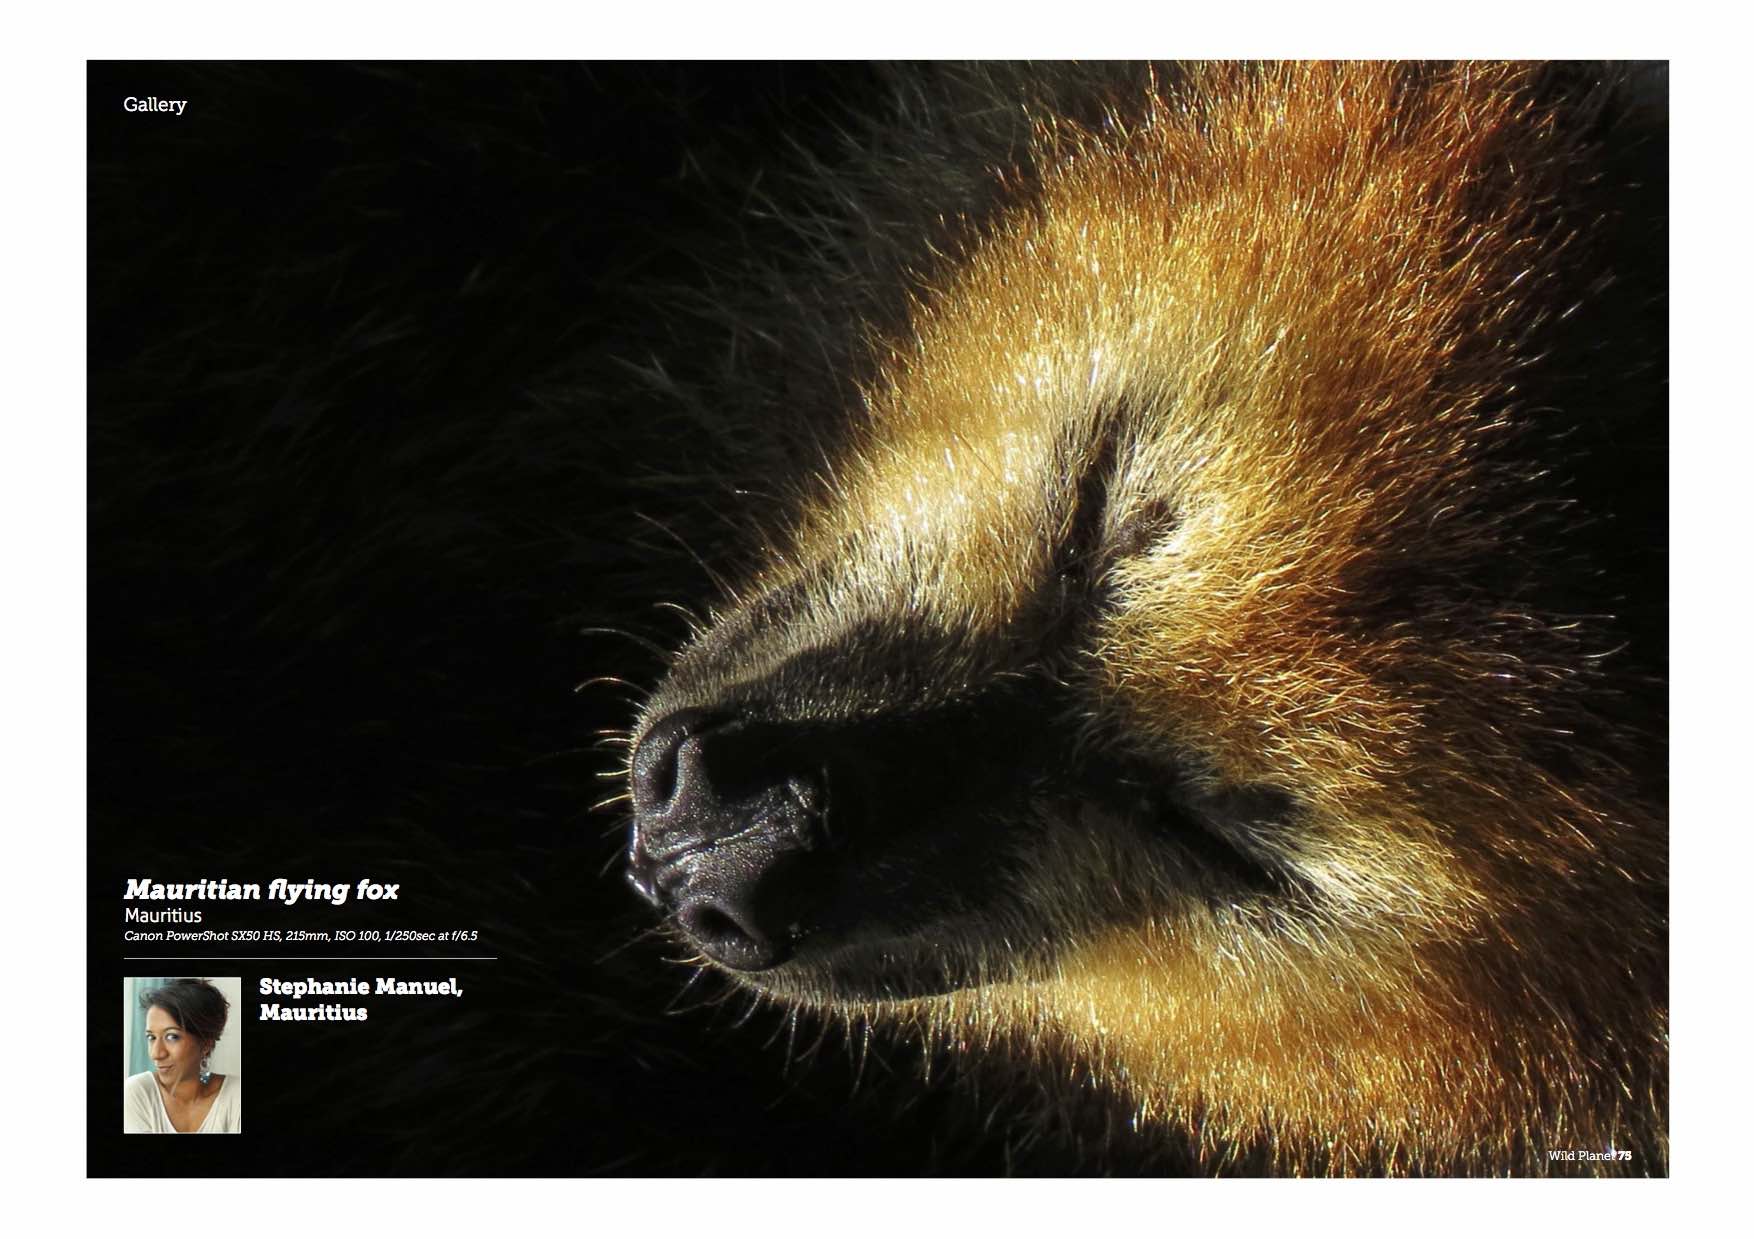 Wild Planet issue 27 Jan 2016- published flying fox